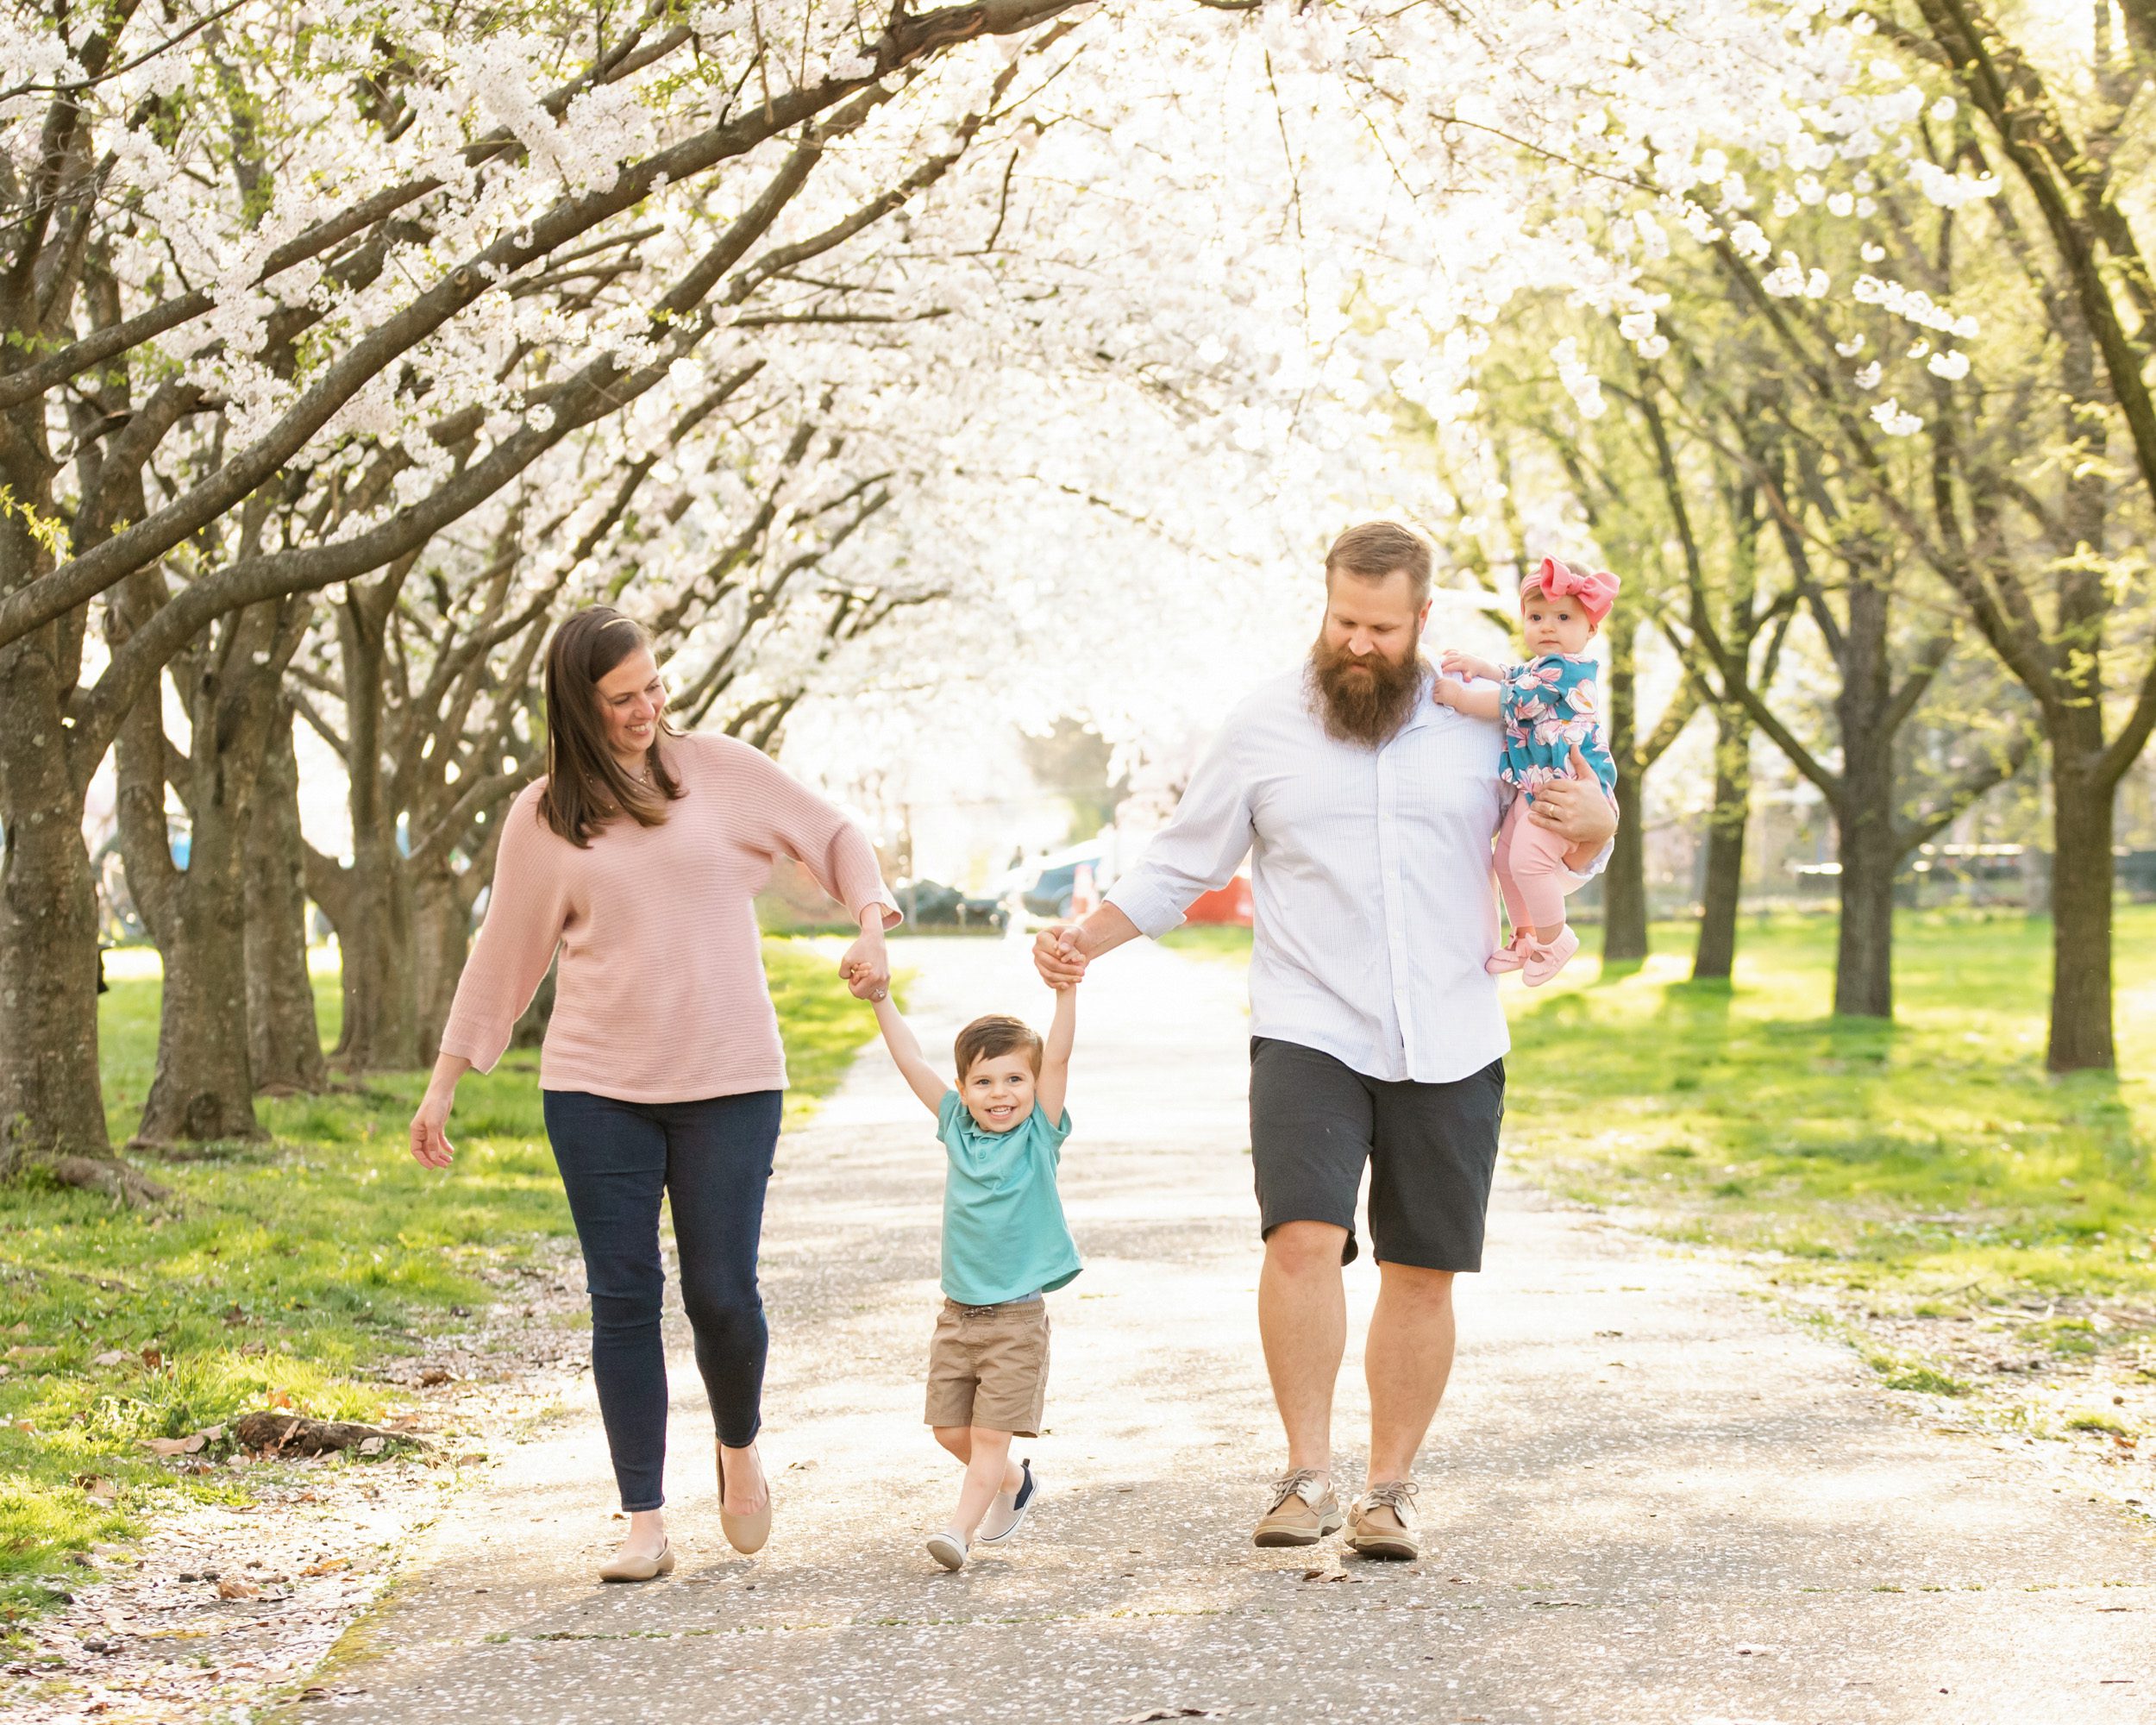 Parents and their two young kids walking and holding hands under a row of cherry blossom trees in full bloom during a family photo session